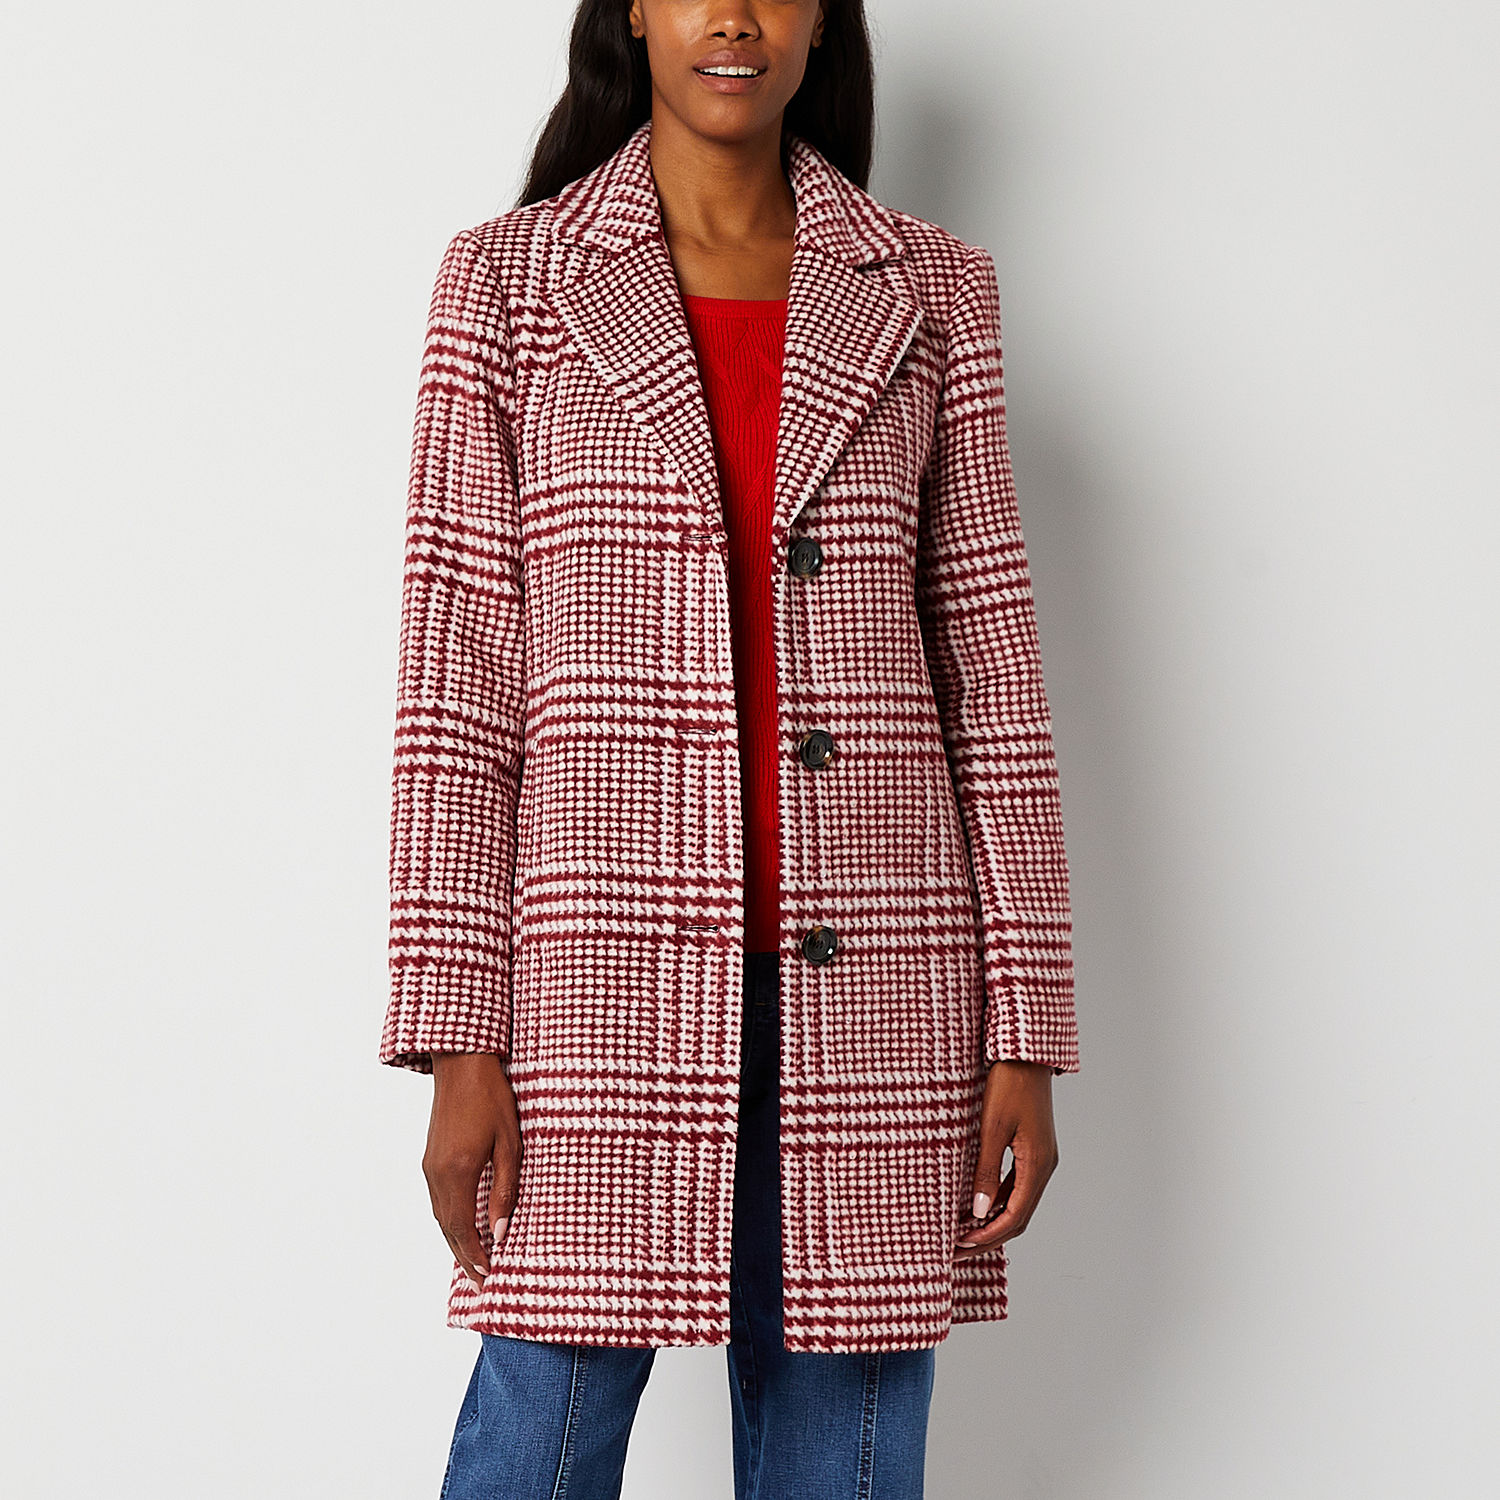 Liz Claiborne Womens Midweight Trench Coat - JCPenney